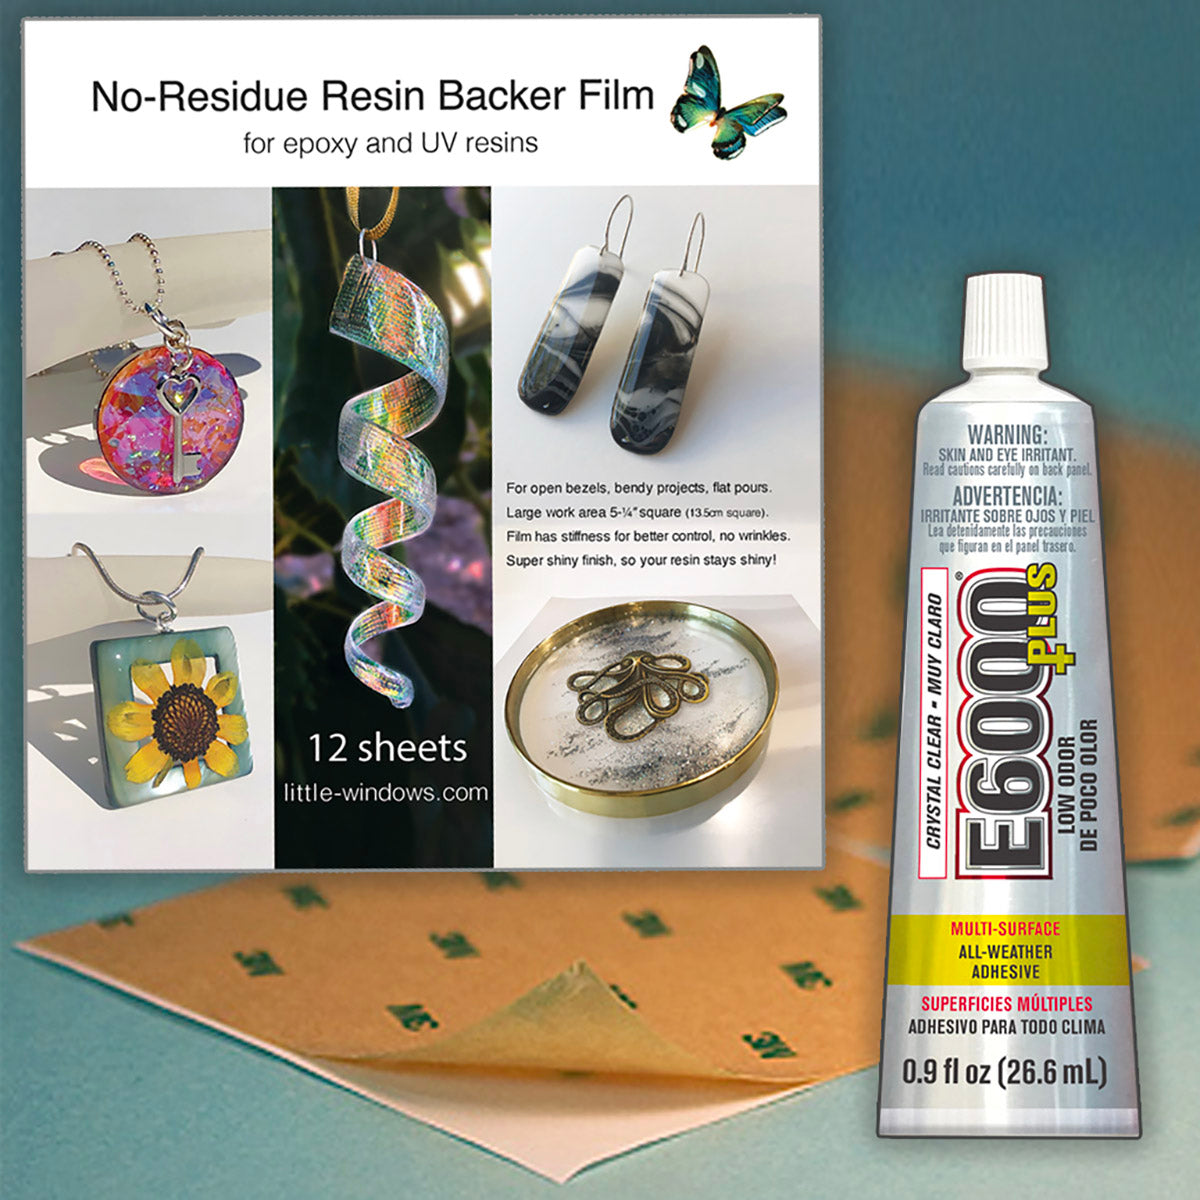 Paper Punch Set - Small (5/8-15/16) - fit our resin molds and bezels –  Little Windows Brilliant Resin and Supplies